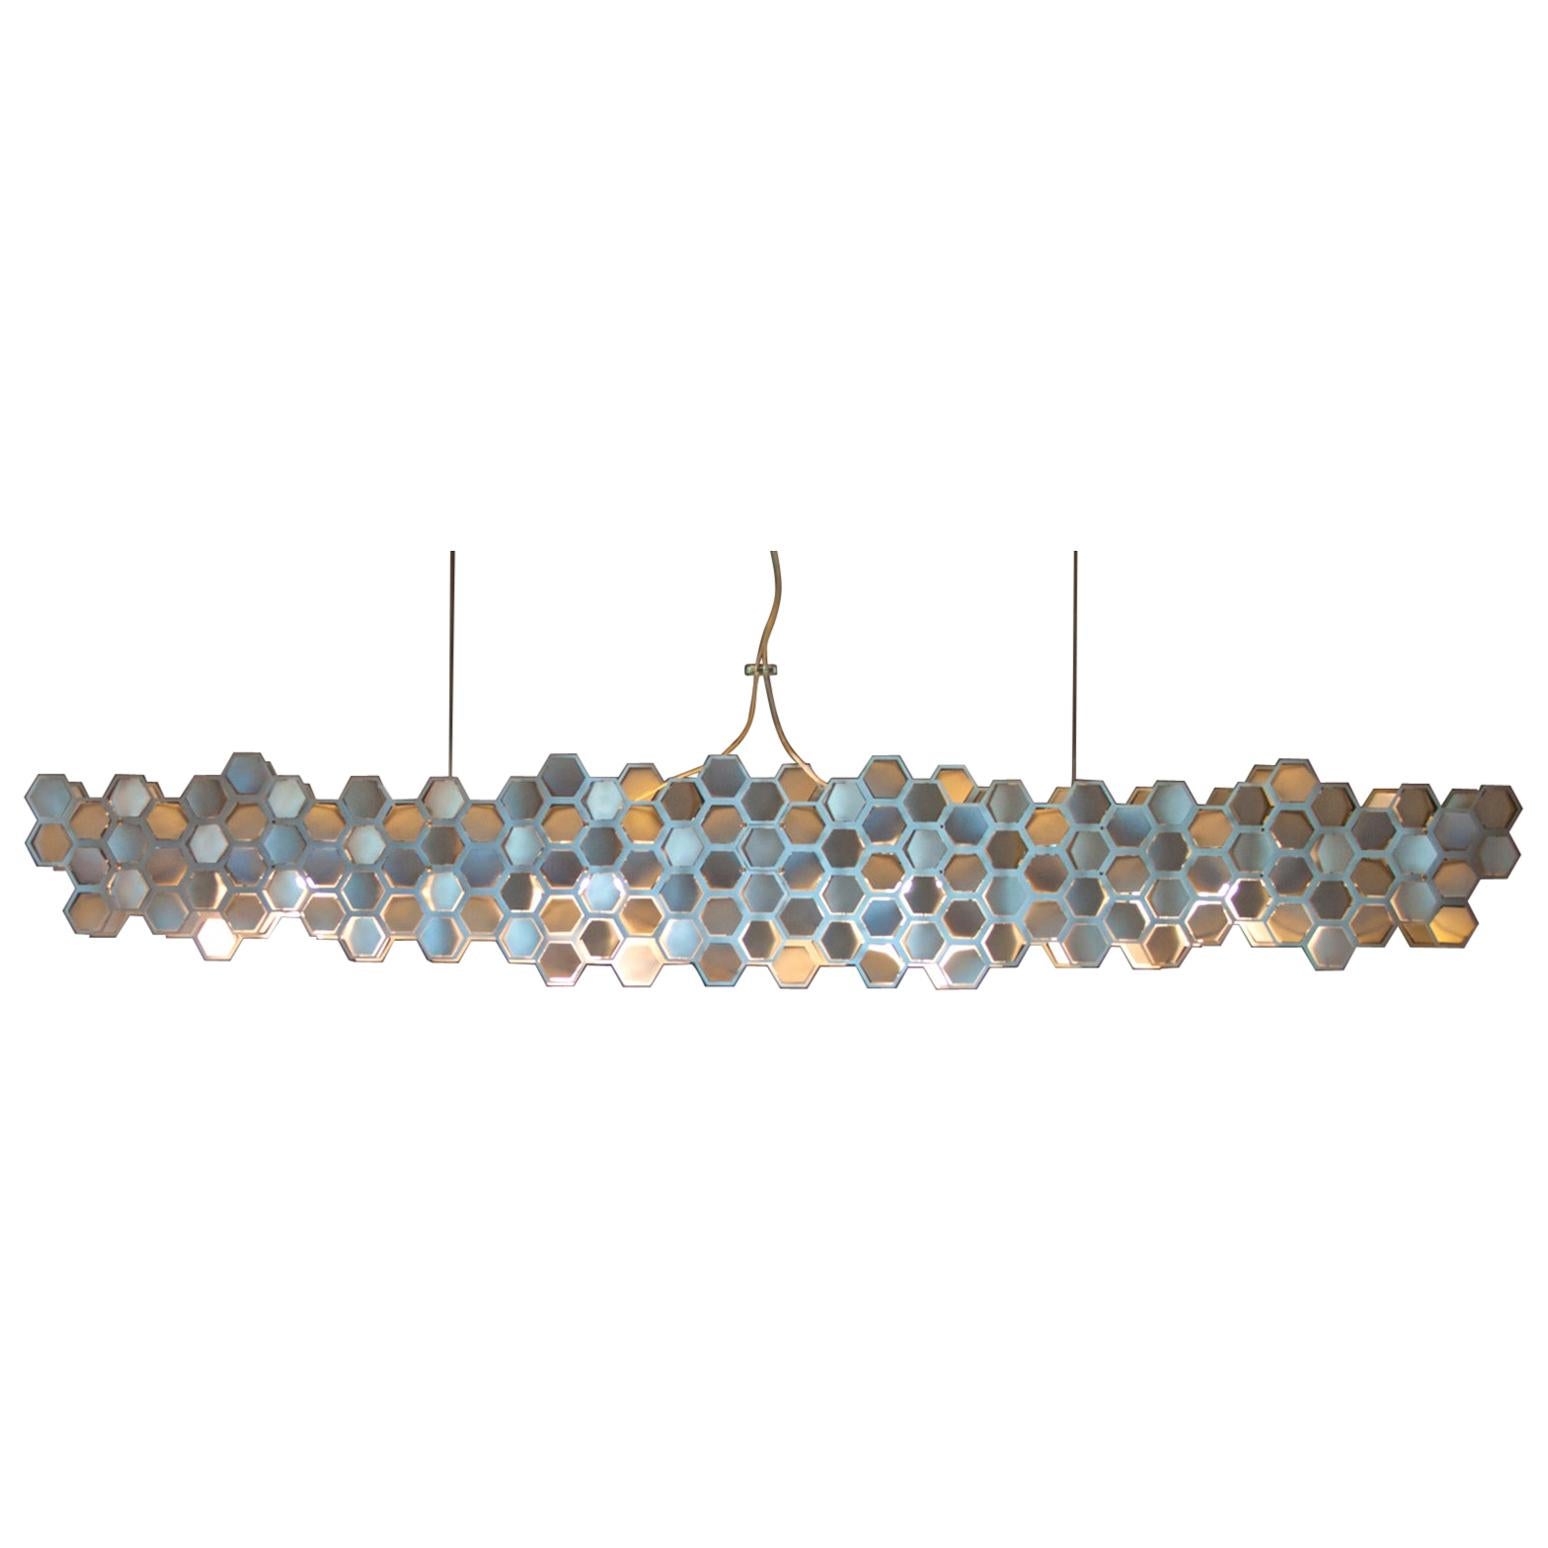 Beeline Linear Chandelier in Stainless Steel by David D’Imperio For Sale